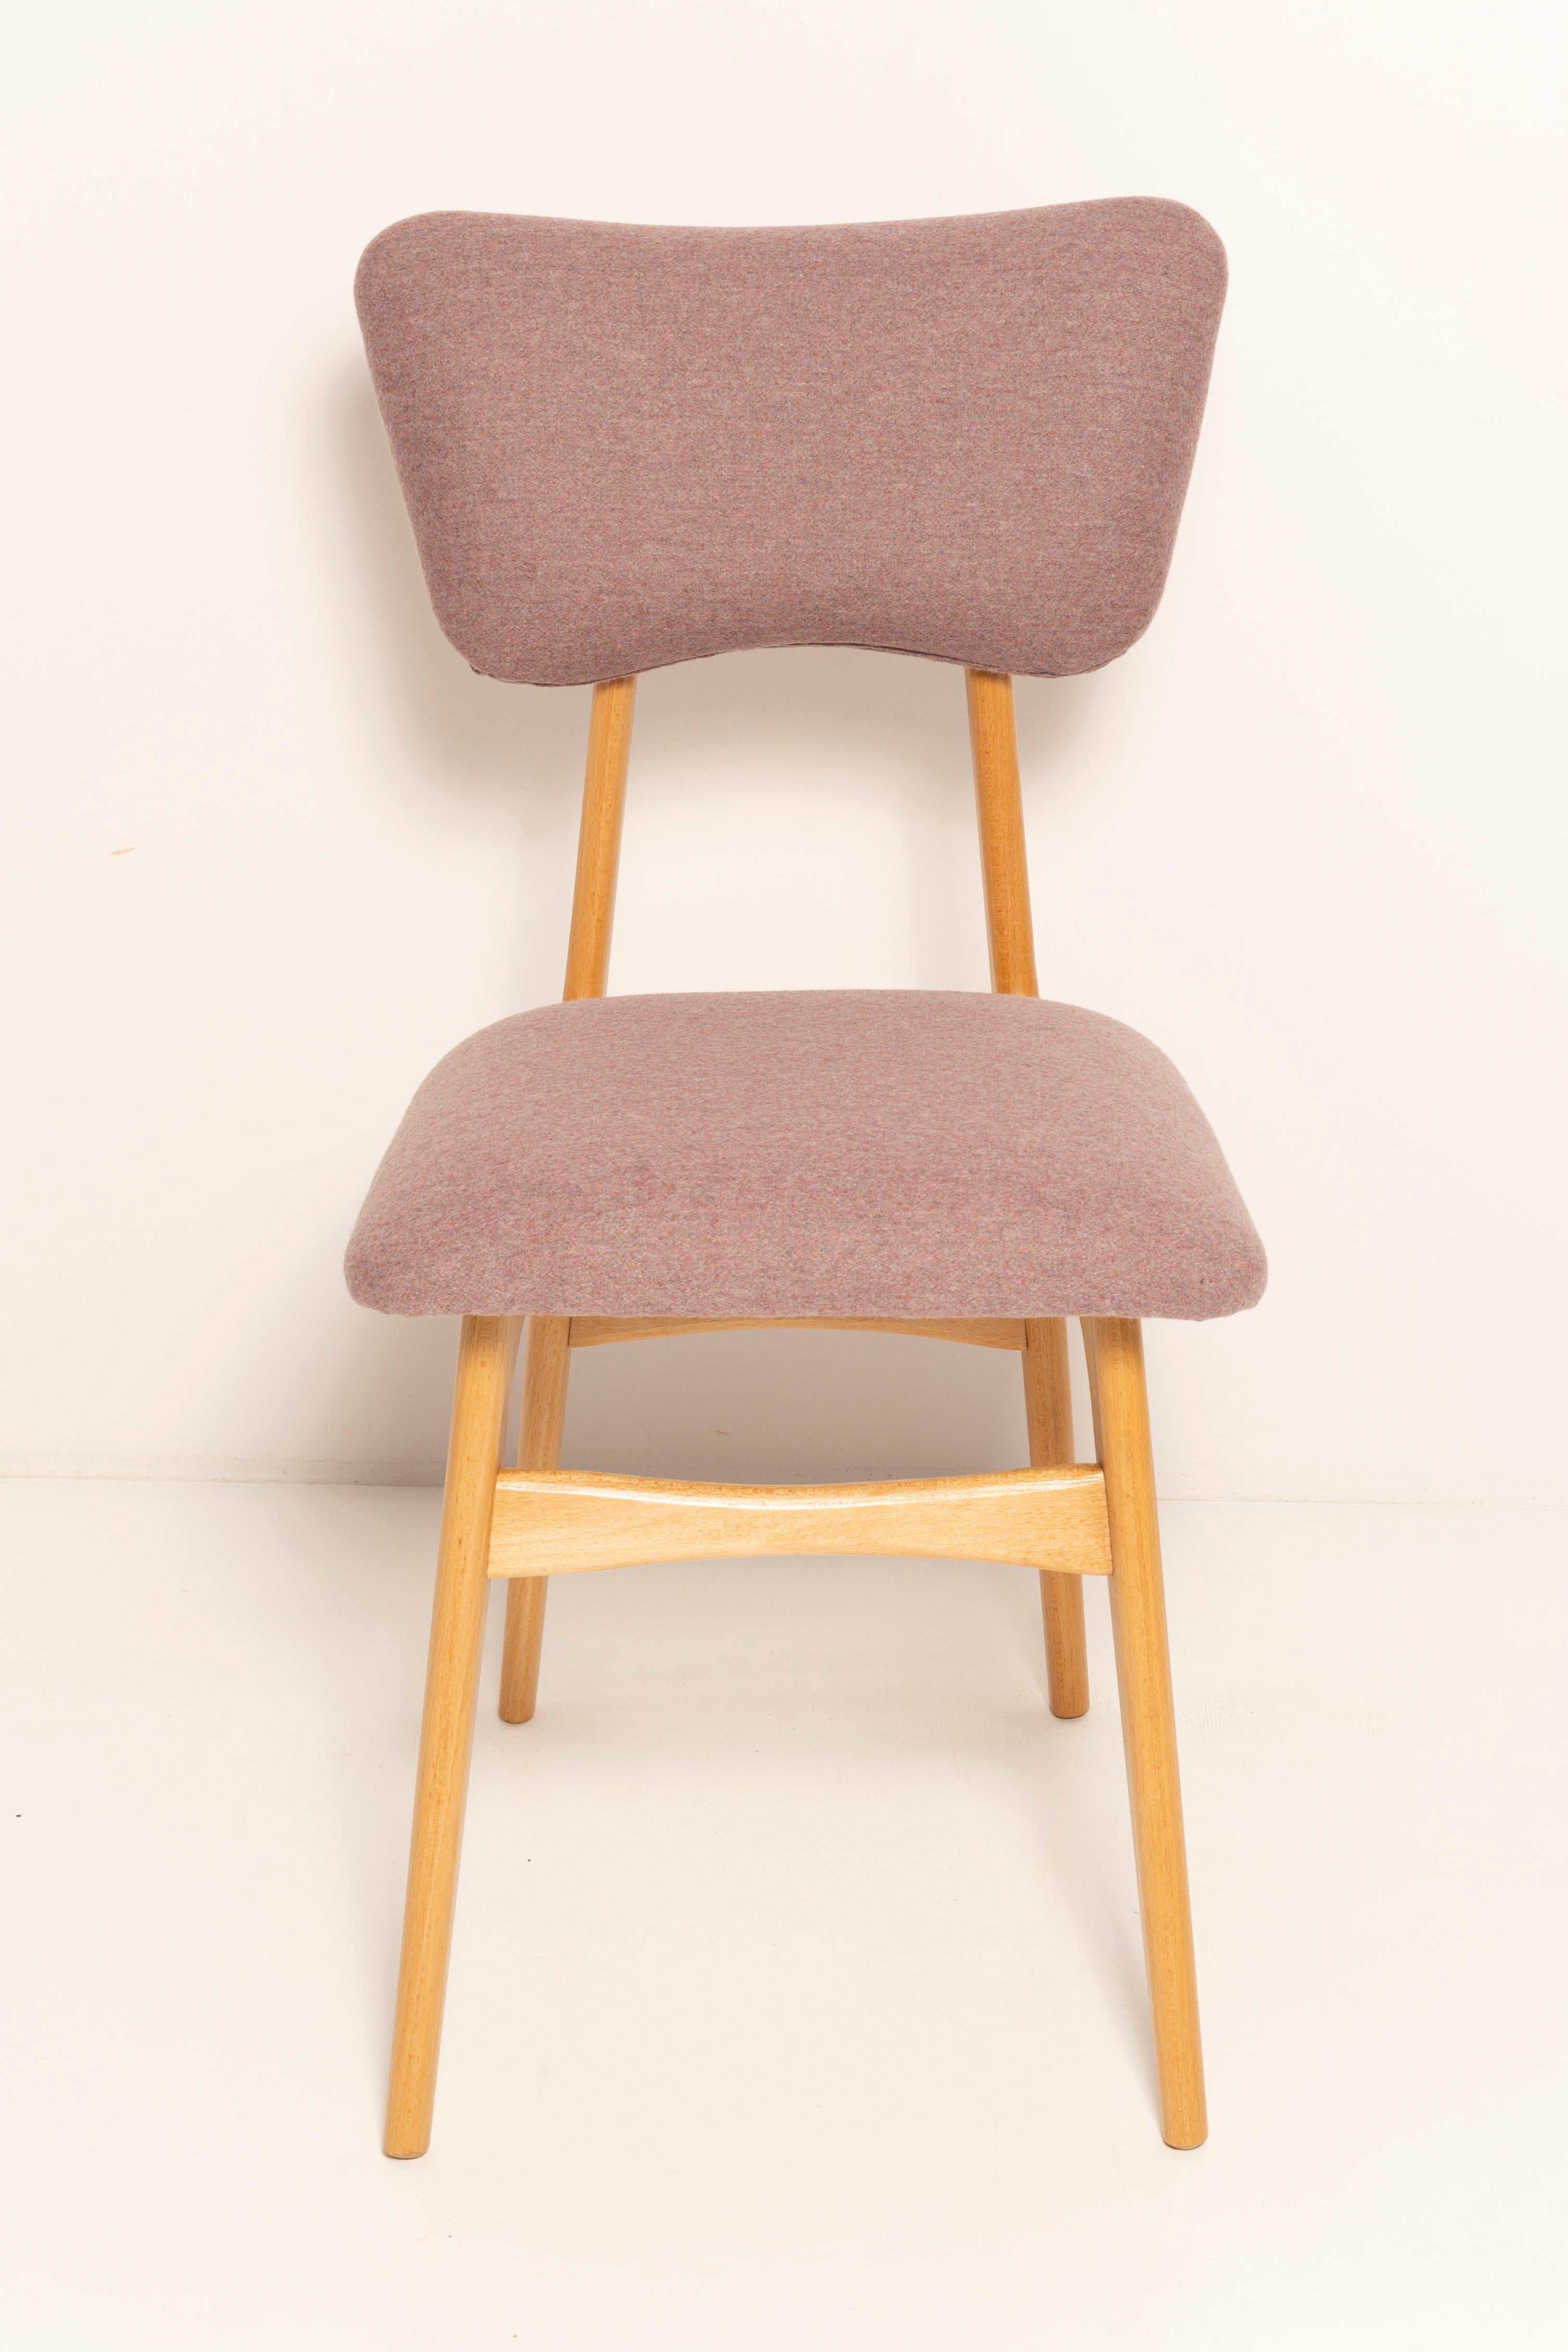 20th Century Butterfly Dining Chair, Pink Wool, Light Wood, Europe, 1960s For Sale 8